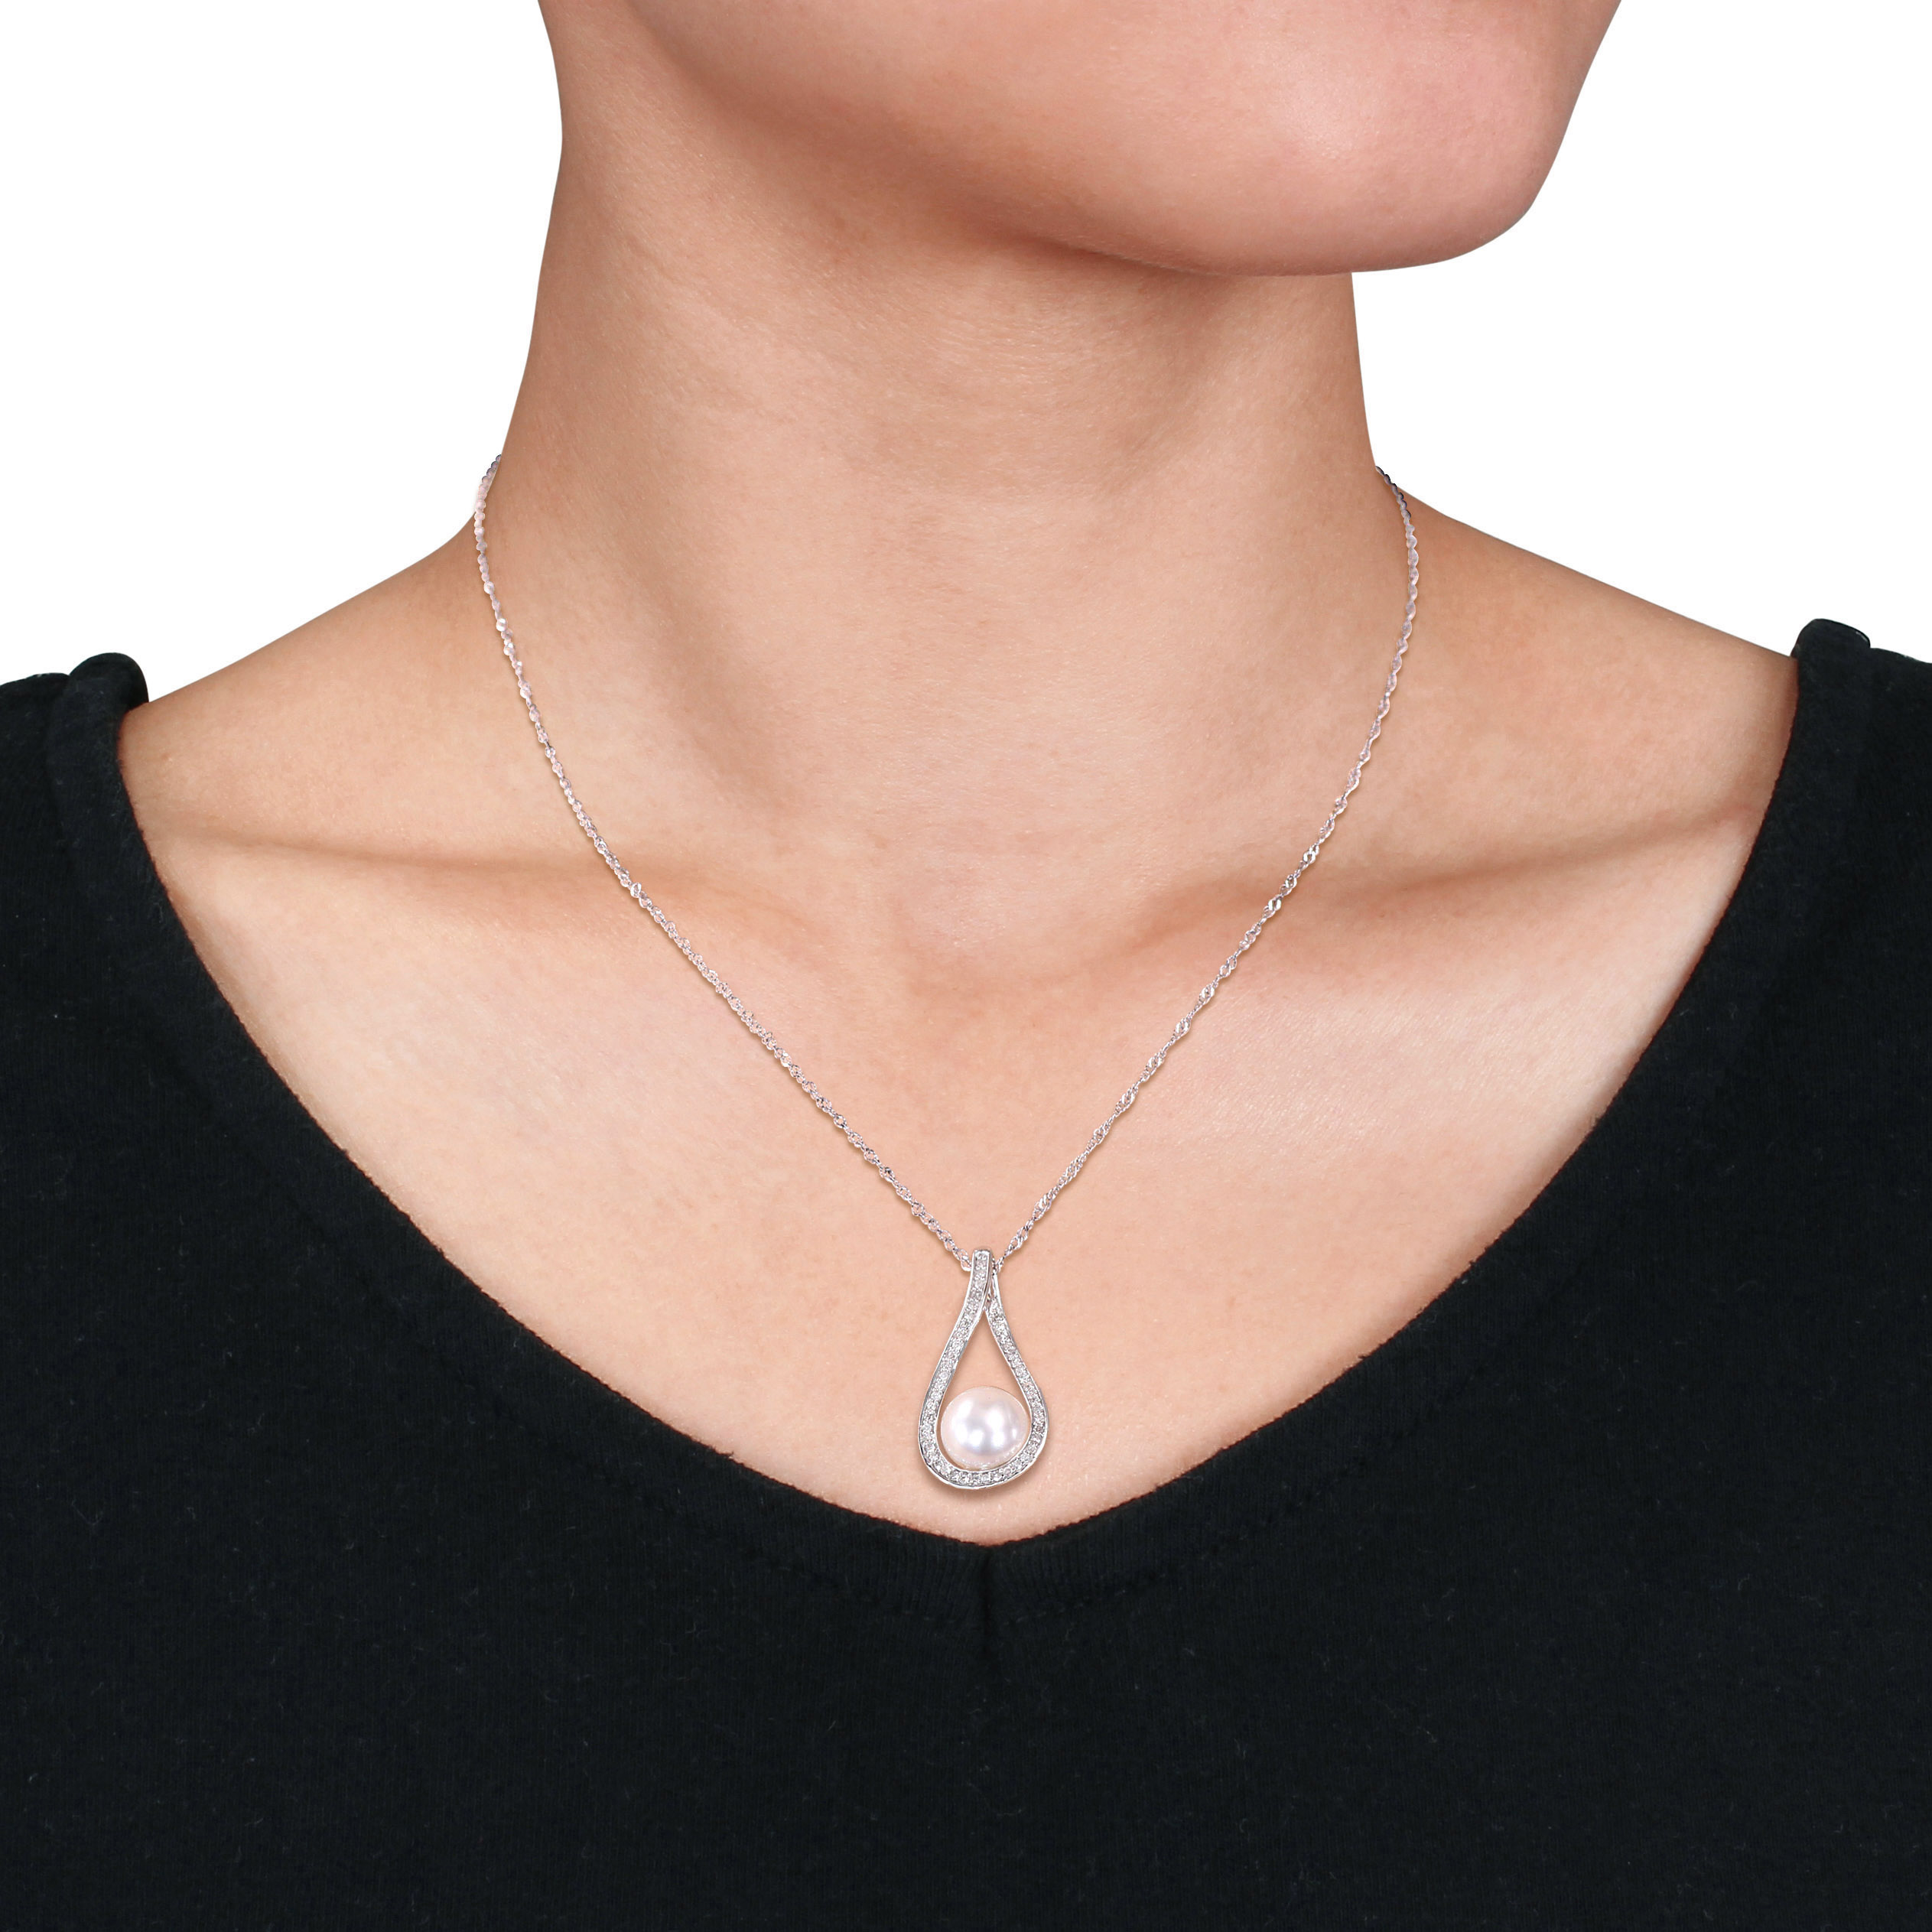 9 - 9.5 MM Cultured Freshwater Pearl and 1/5 CT TW Diamond Tear Drop Pendant with Chain in 14k White Gold